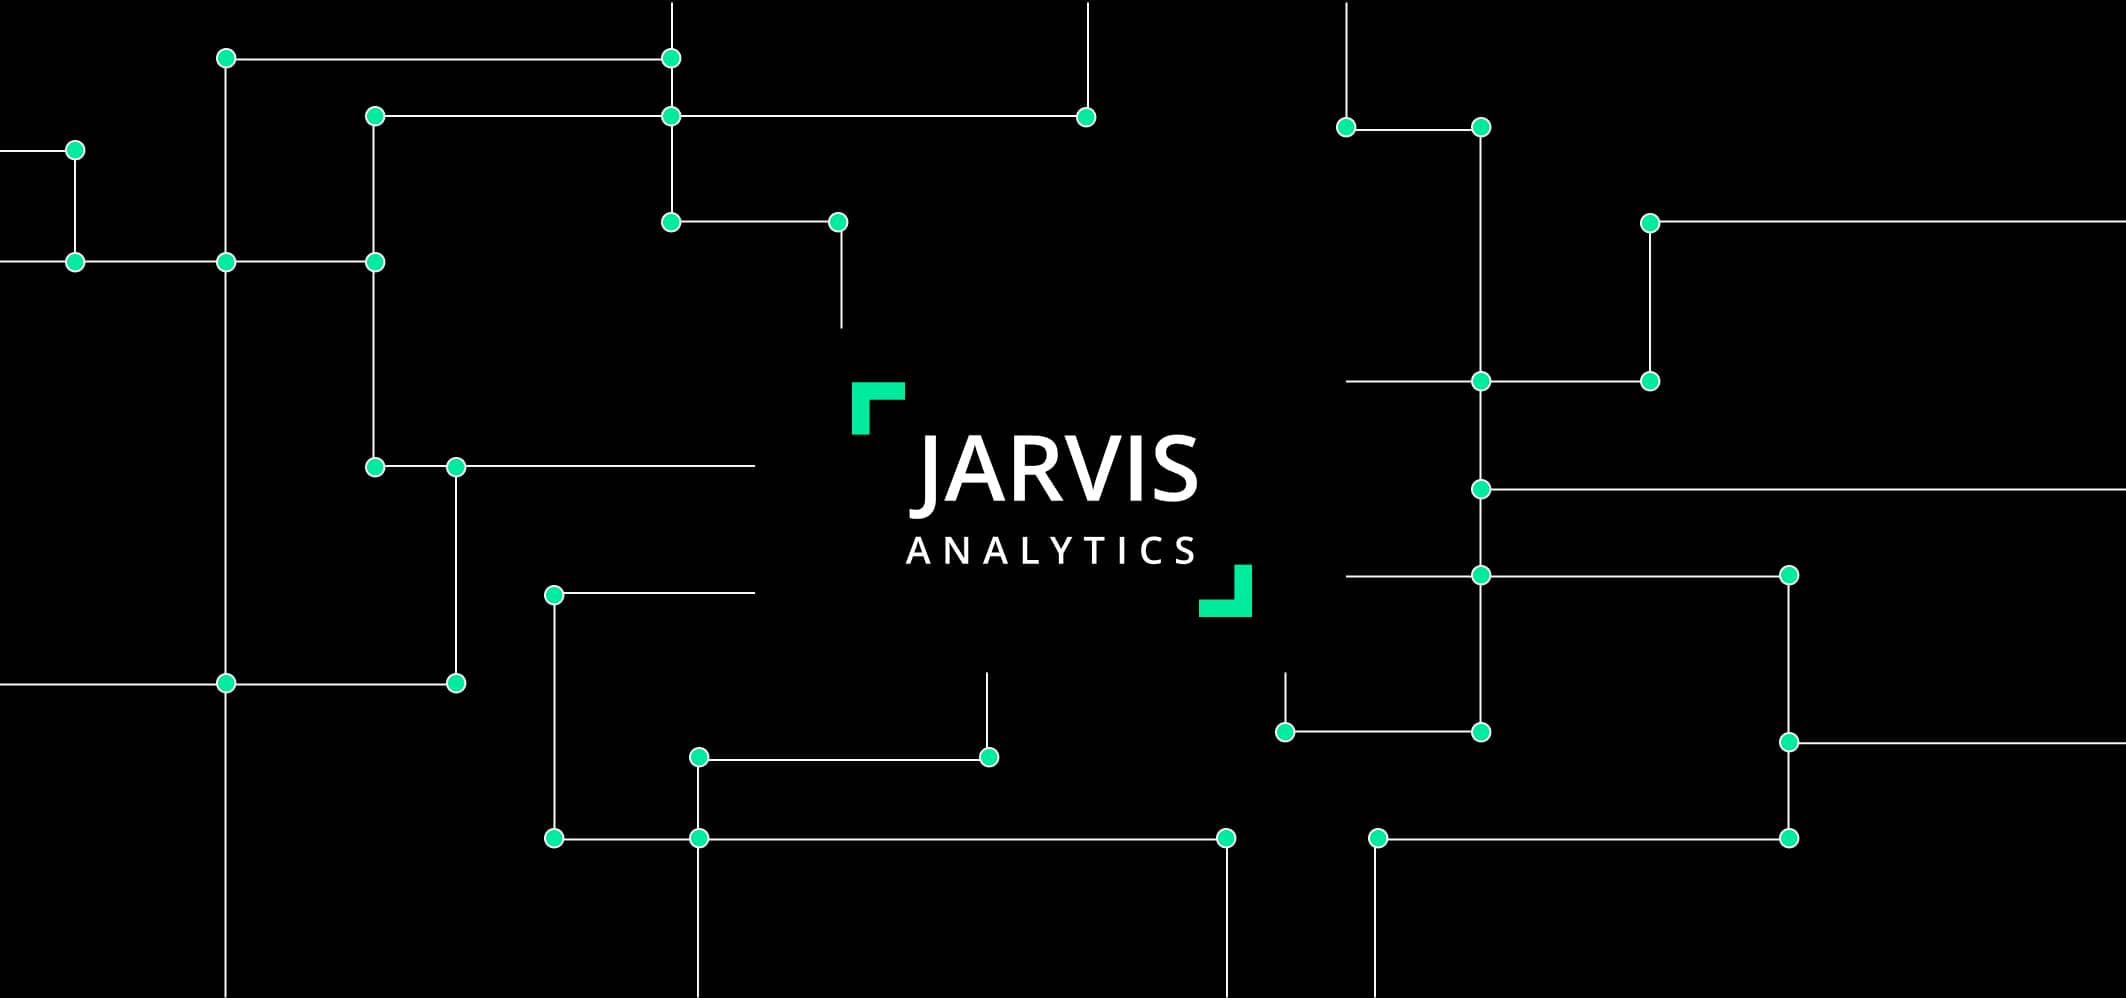 Dr. Greg Kerbel: “Jarvis is an Amazing Software Company”